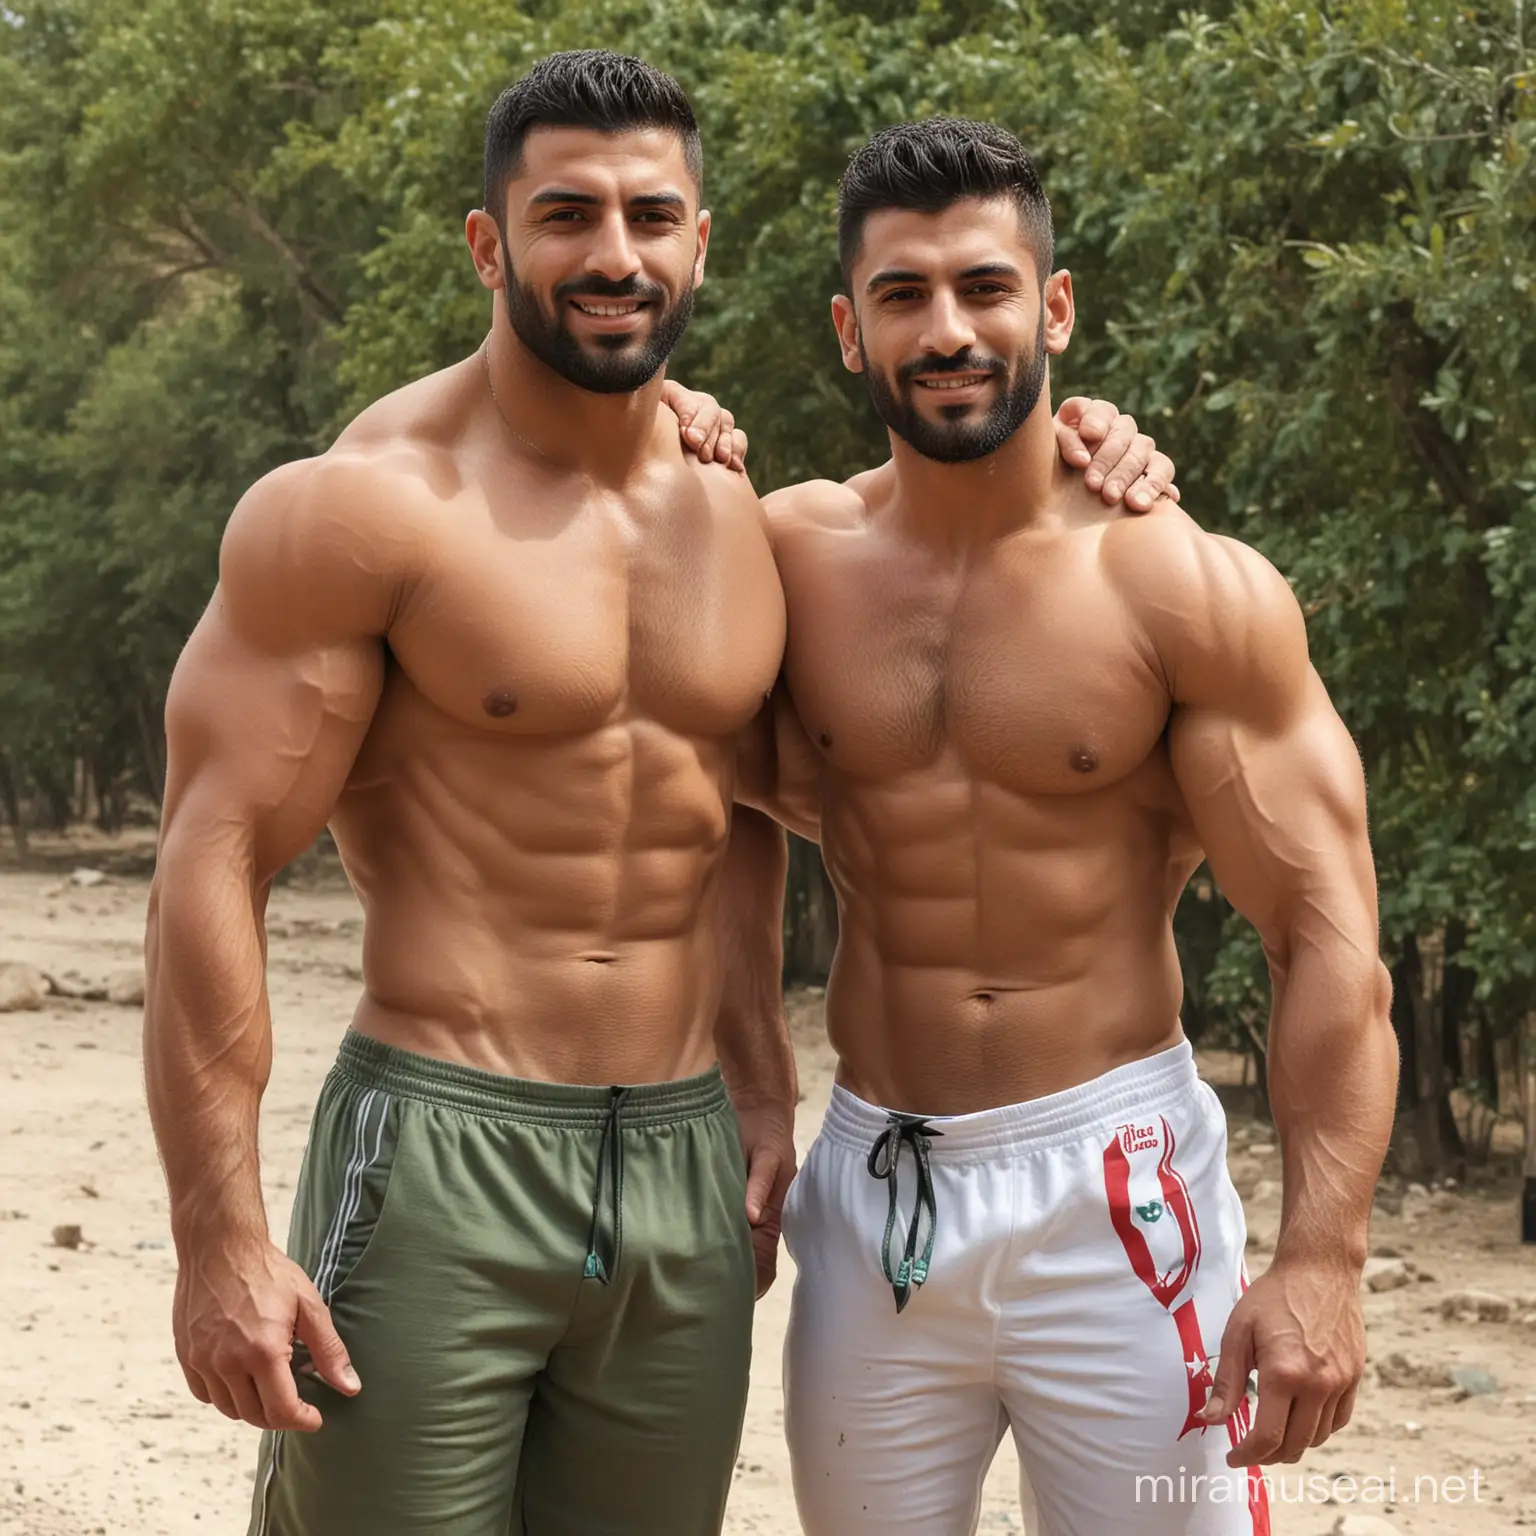 Two hot handsome muscular male wrestlers from Lebanon, age 34, shirtless